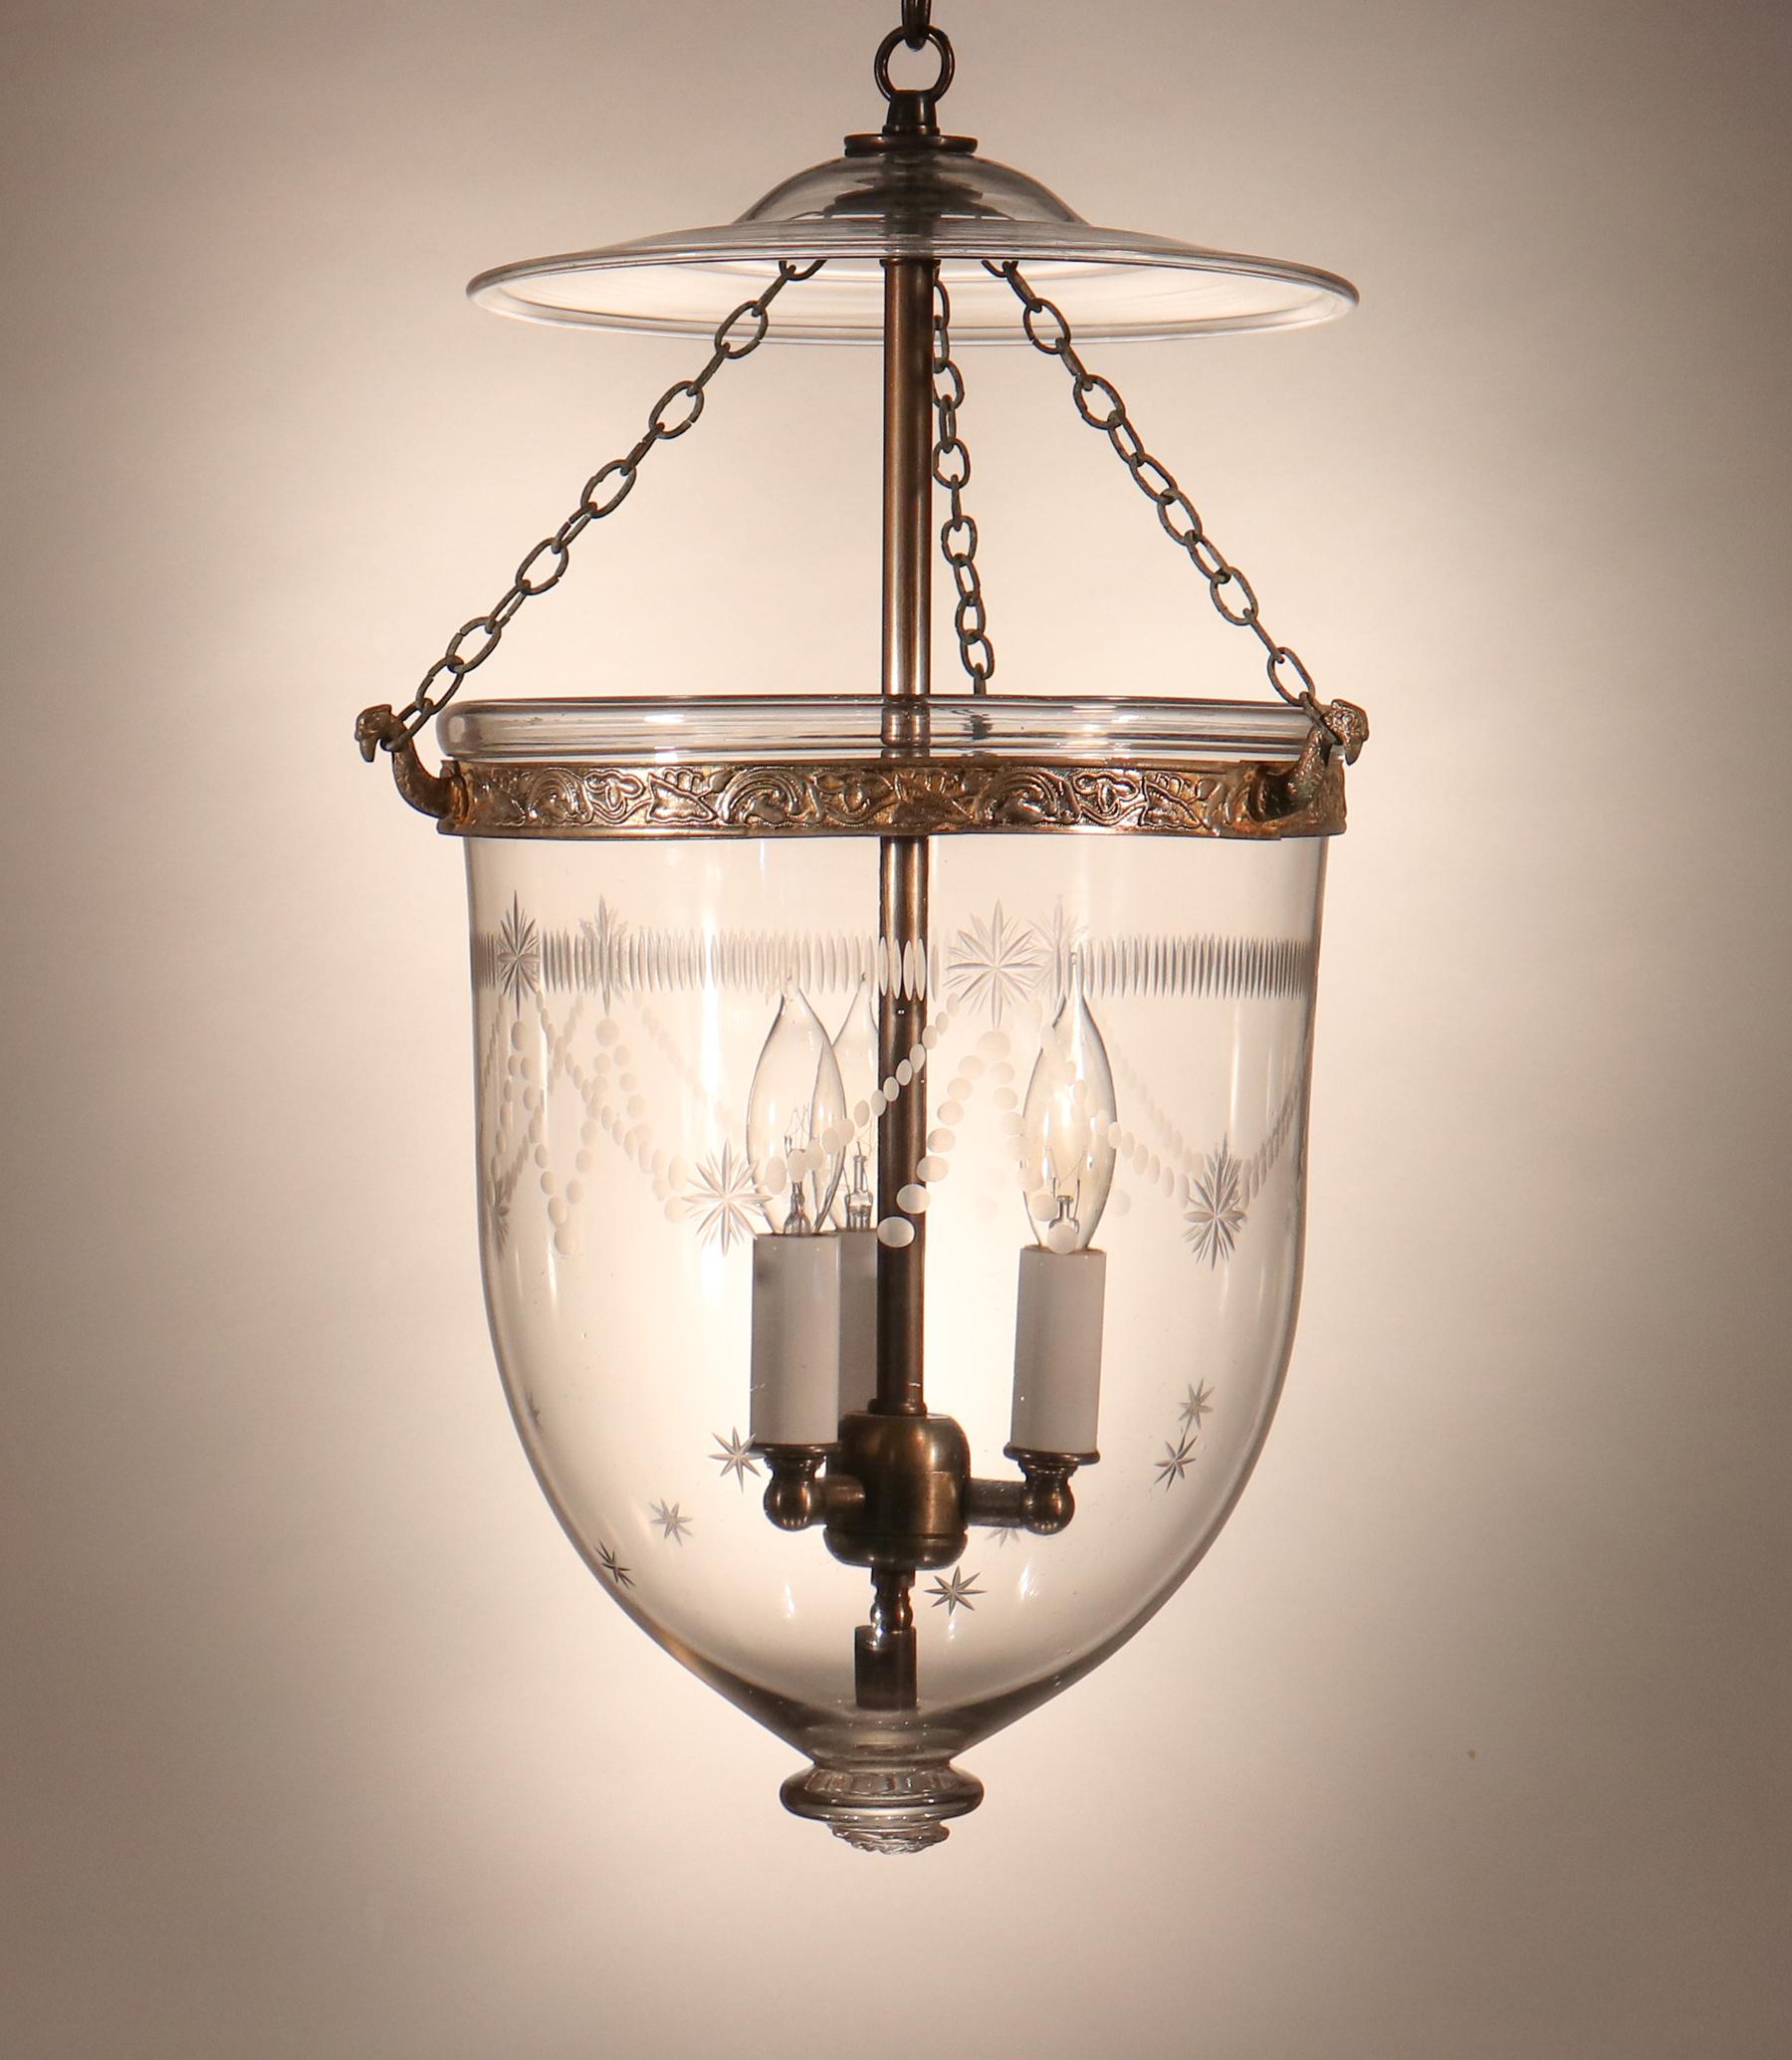 An antique English bell jar lantern, circa 1890, with lovely form and good quality hand blown glass—including several desirable air bubbles in the bell jar, itself, and swirls in the smoke bell/lid. The pendant light features a finely etched